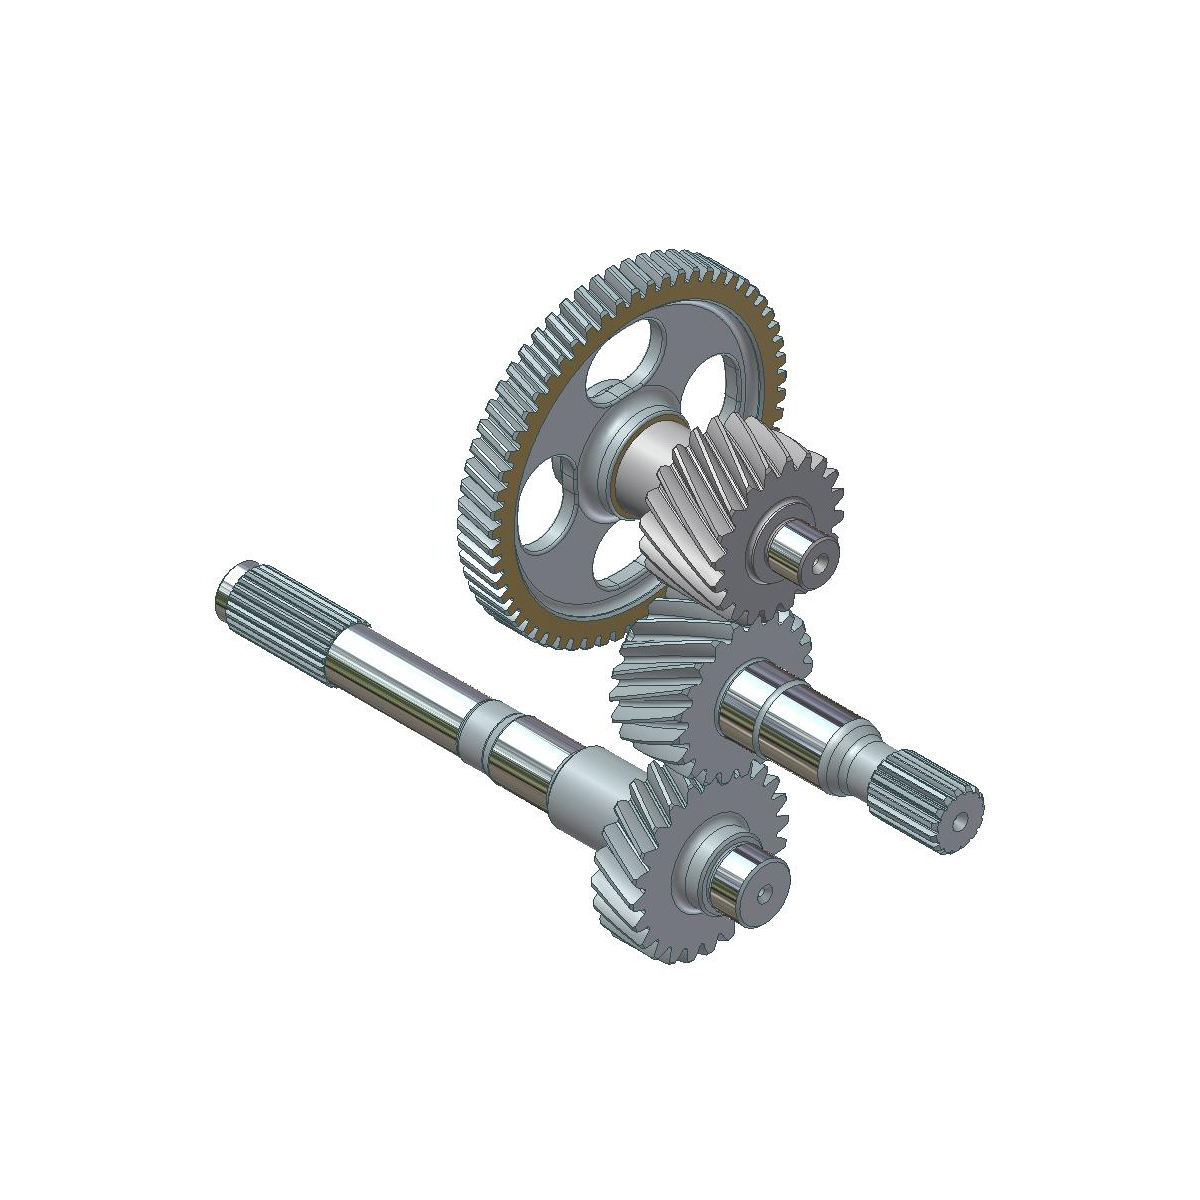 Motion Control Gears and Shafts